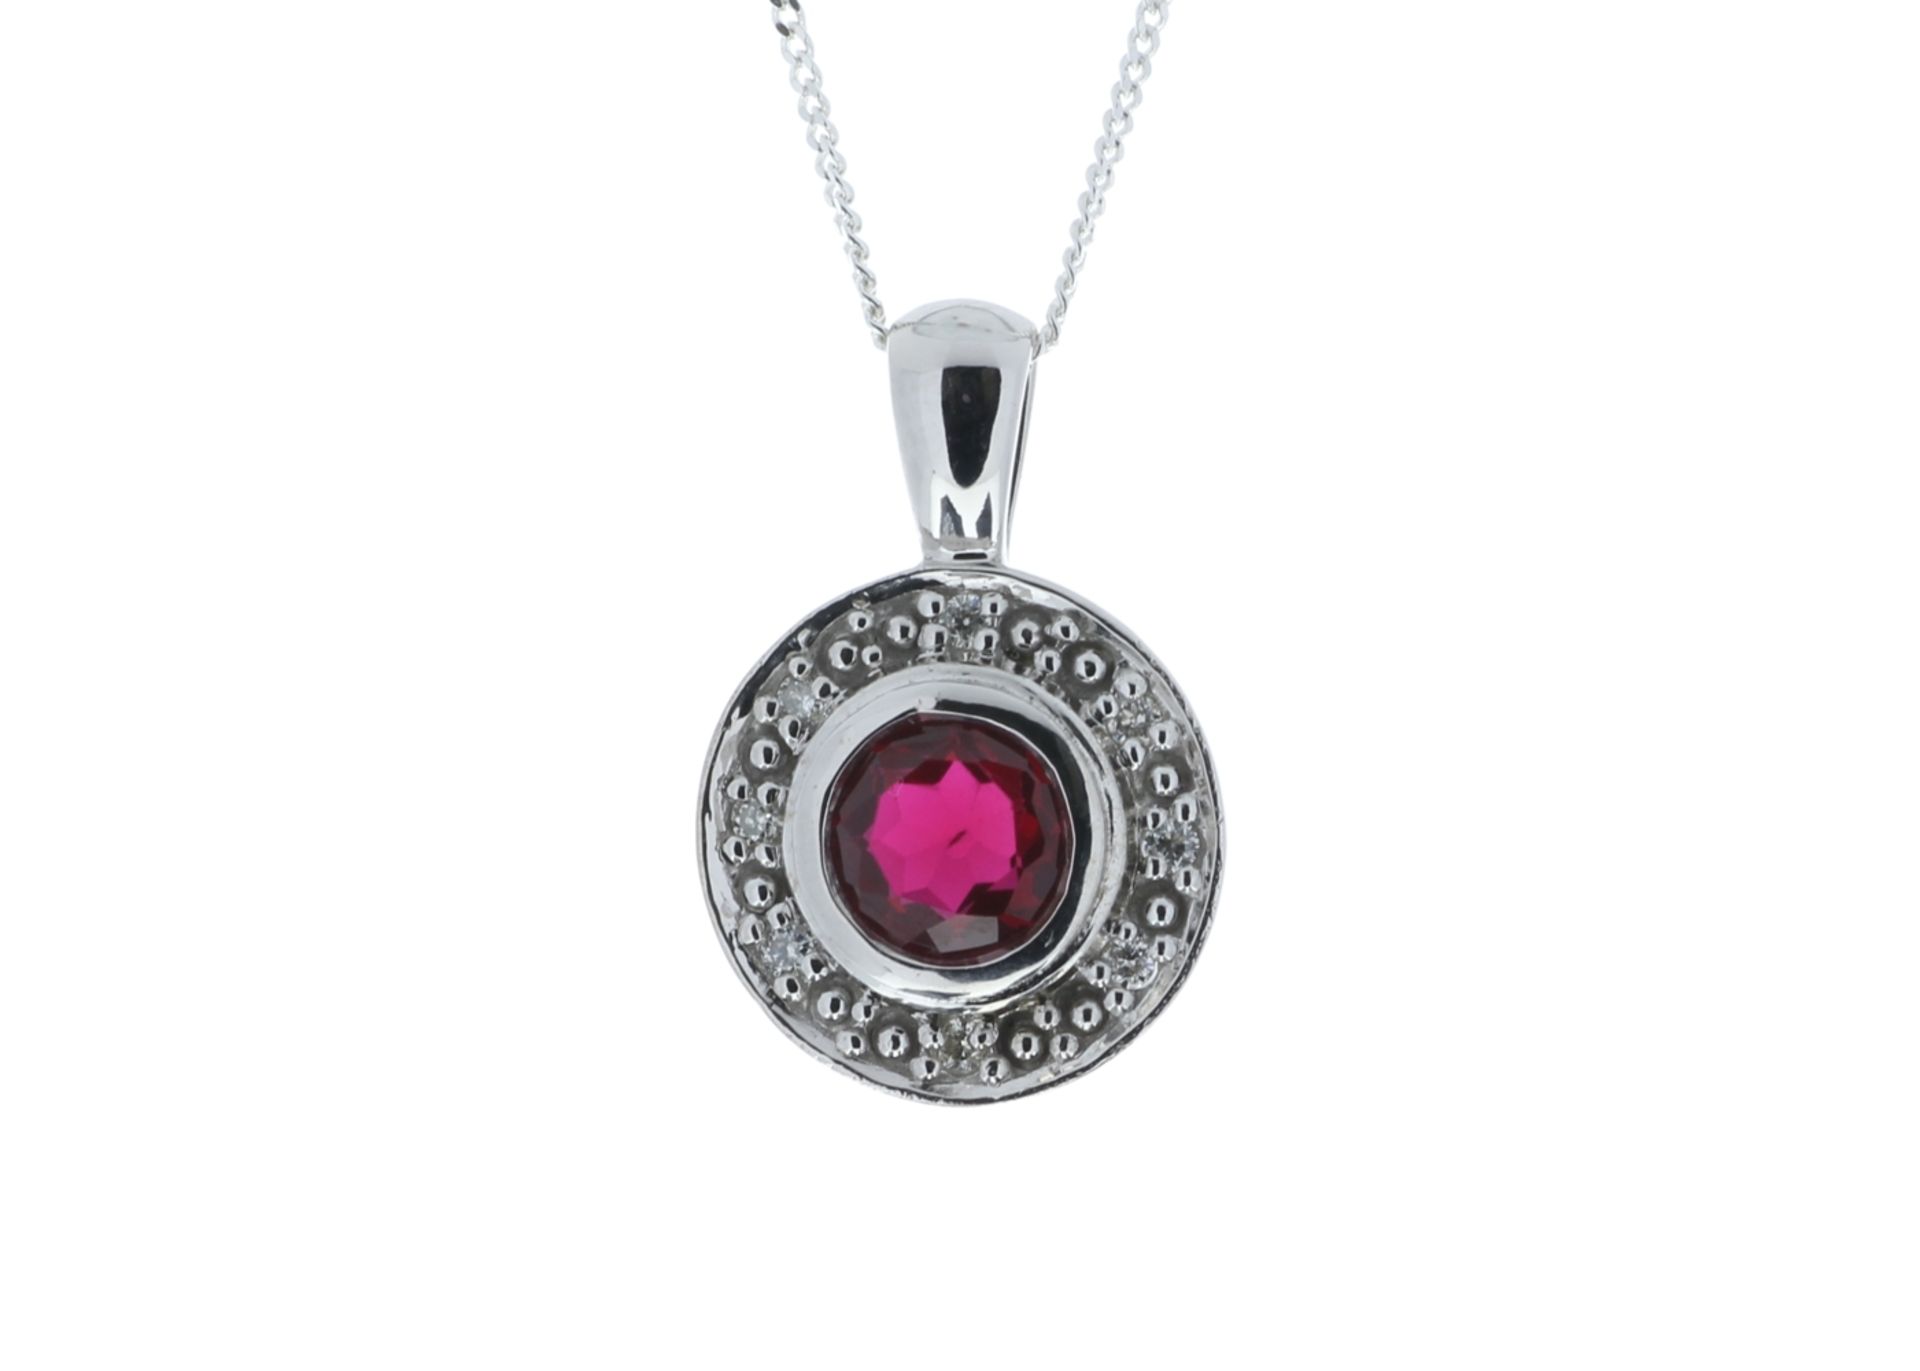 9ct White Gold Created Ruby Diamond Pendant 0.08 Carats - Valued by GIE £1,520.00 - With a deep